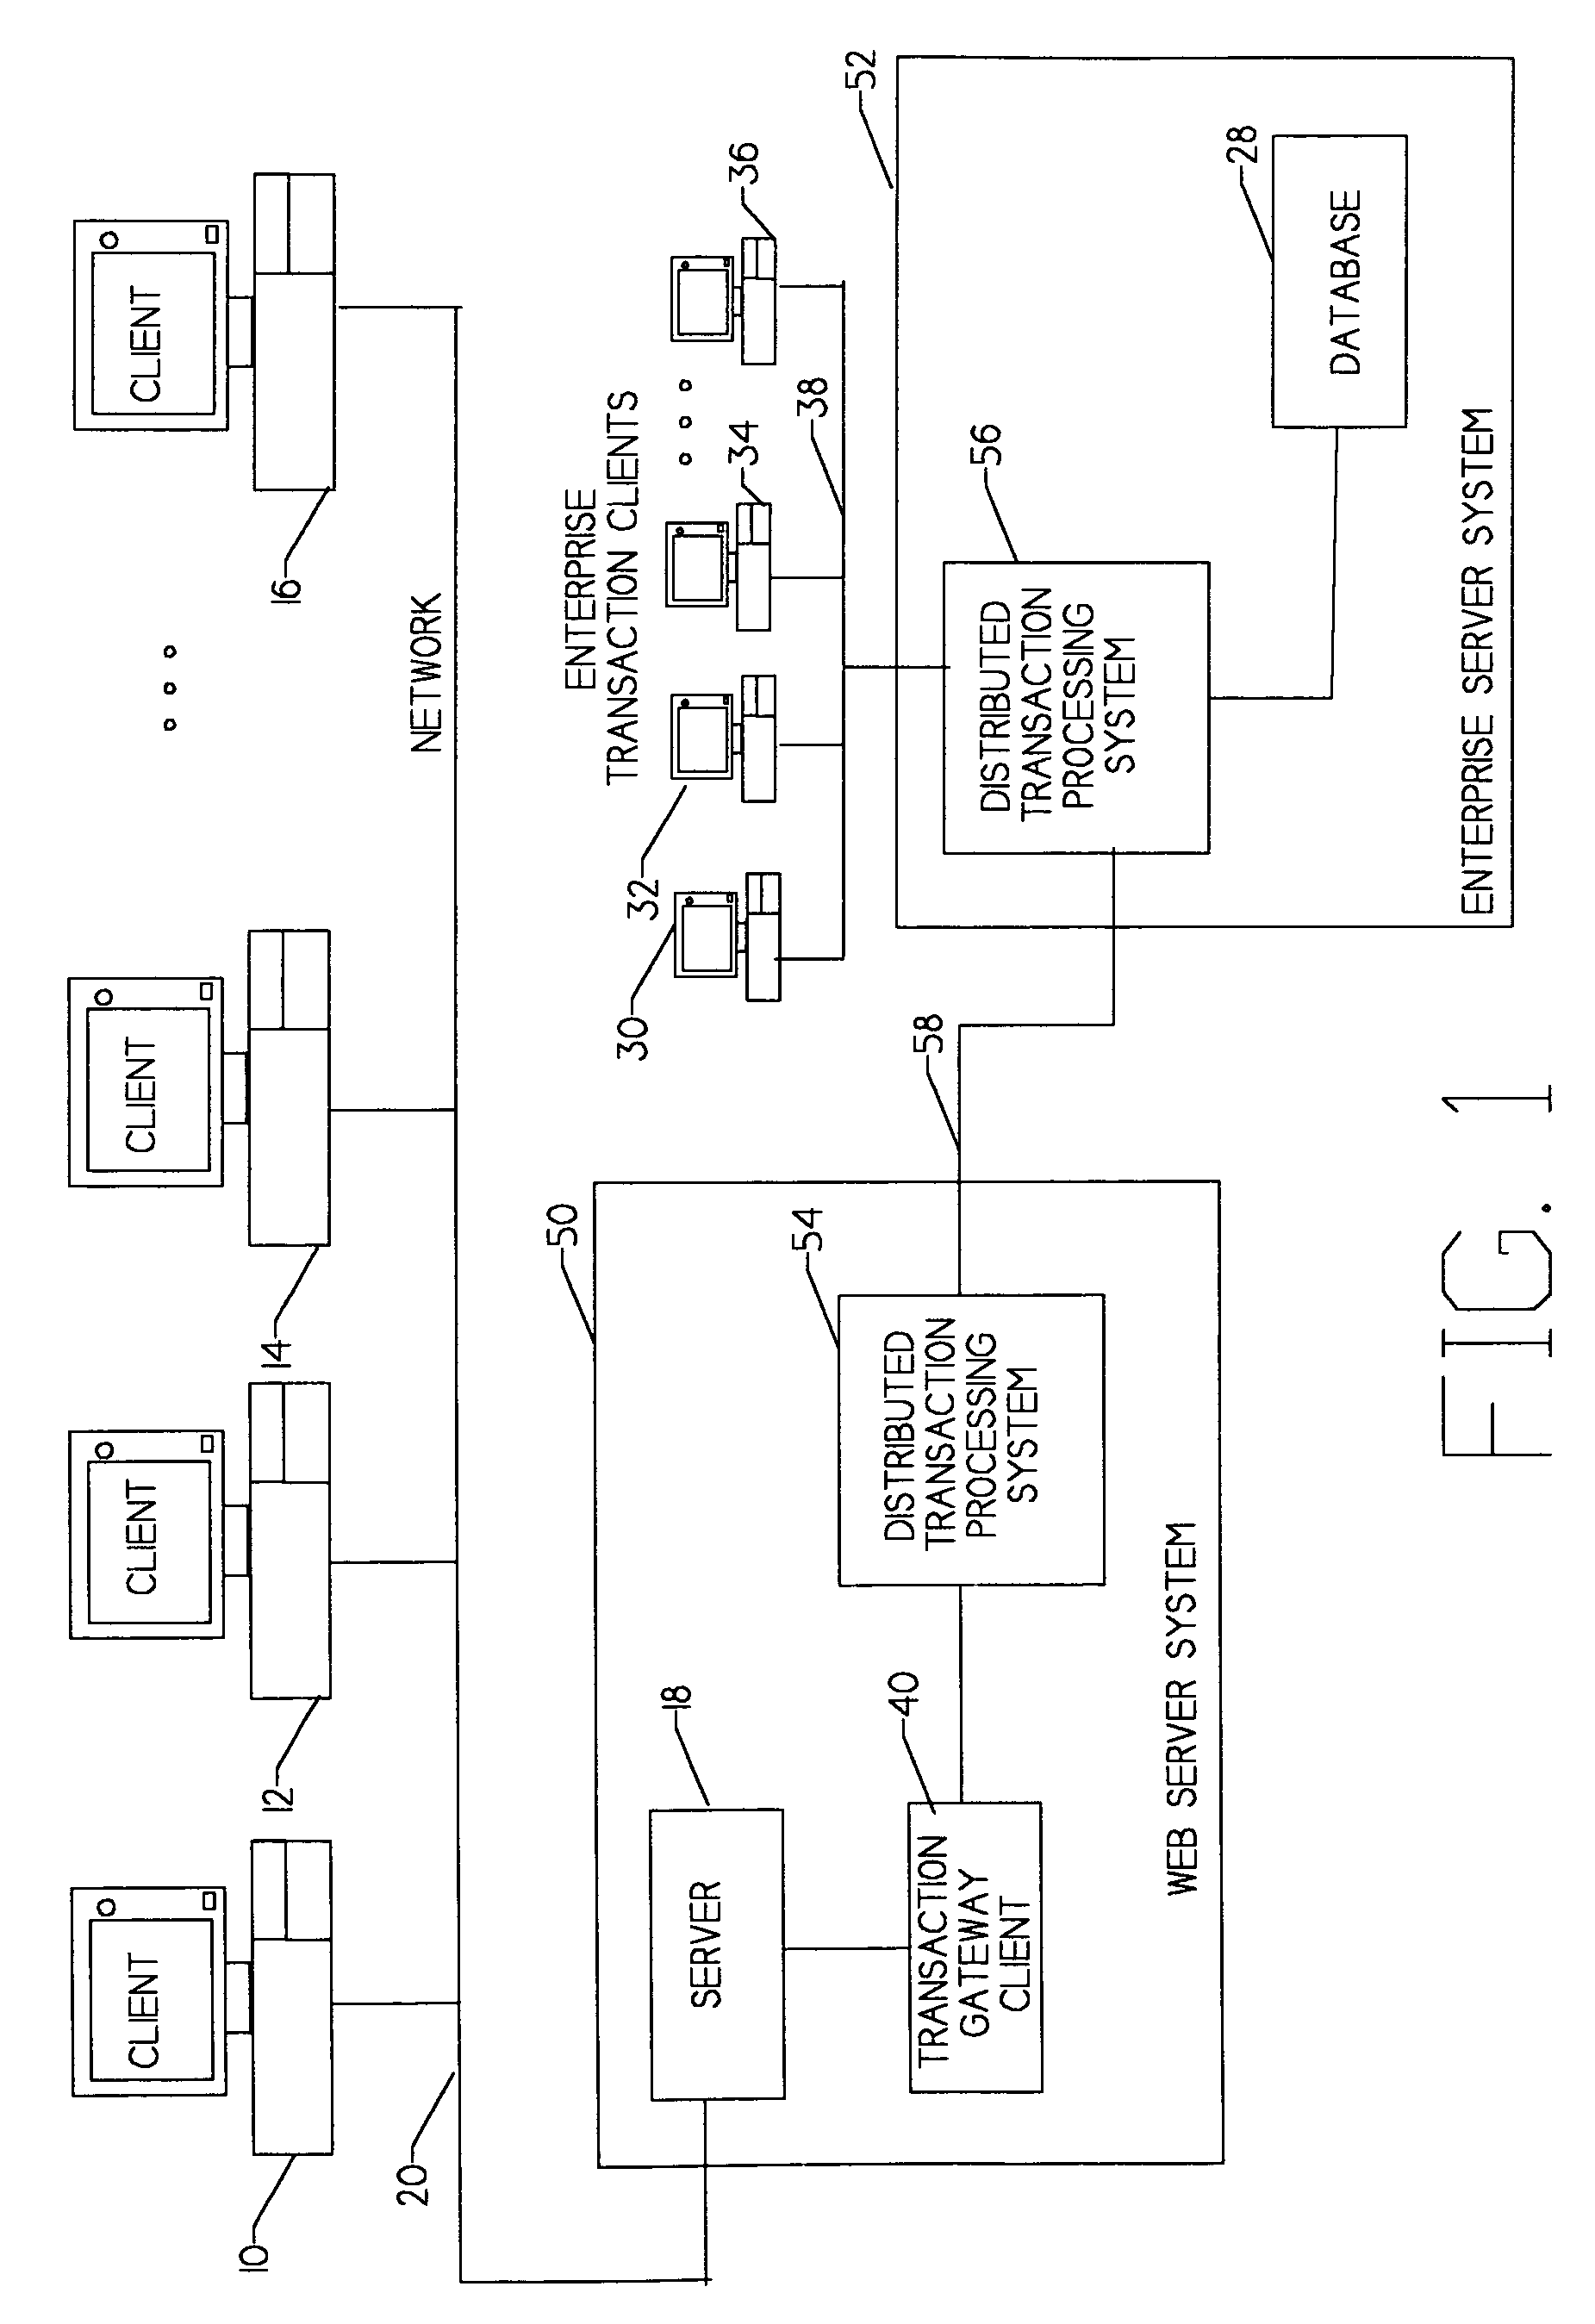 Method and system for handling transaction requests from workstations to OLTP enterprise server systems utilizing a common gateway